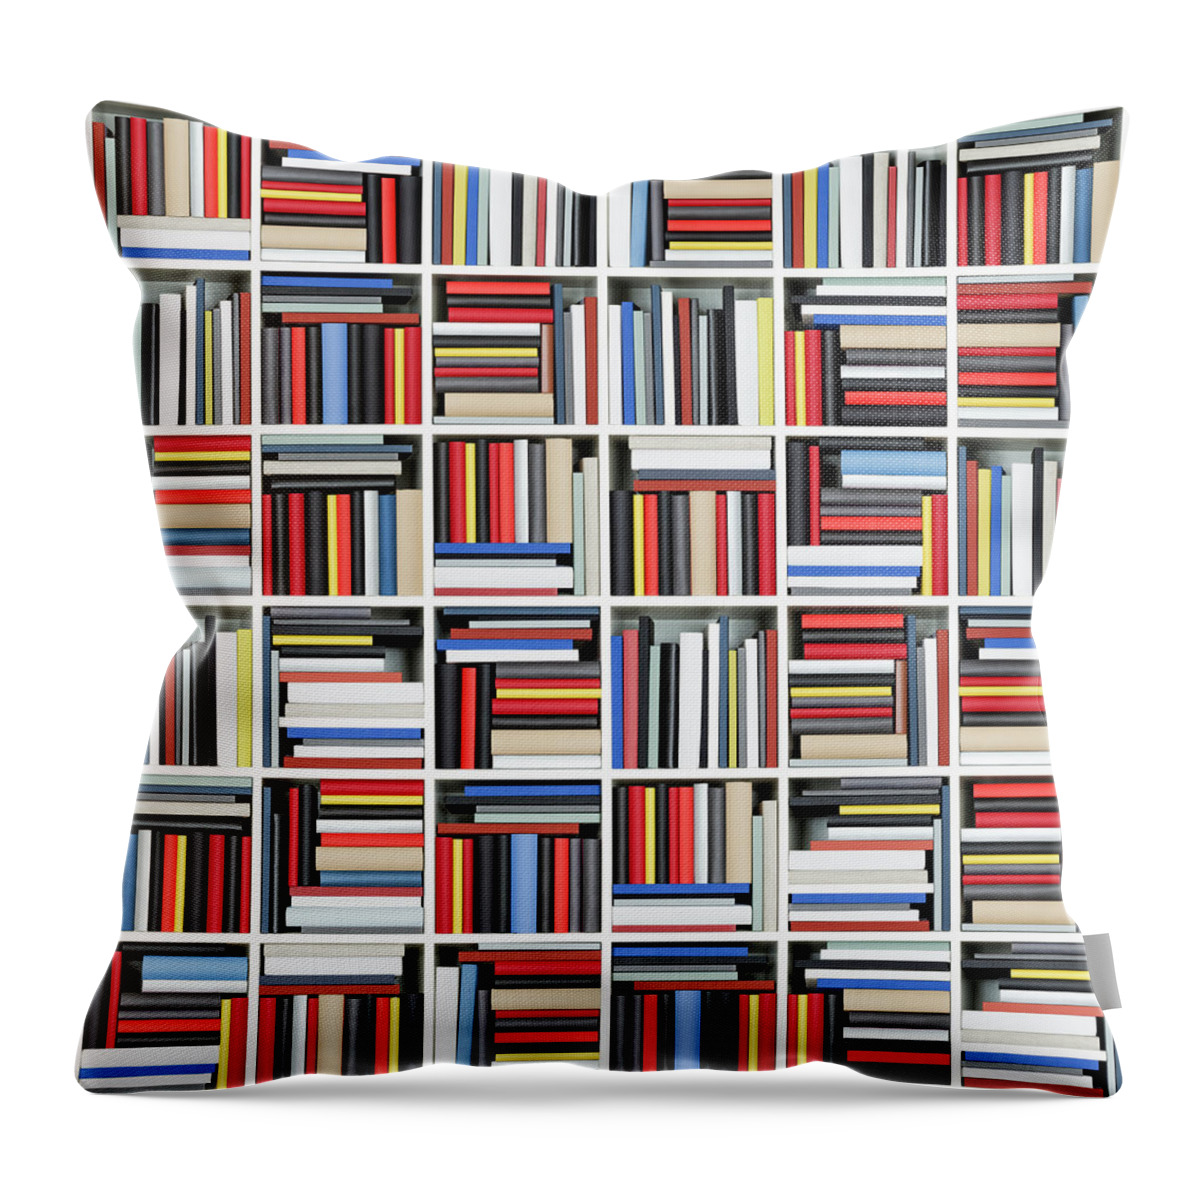 Large Group Of Objects Throw Pillow featuring the photograph Books In A Shelf by Jorg Greuel